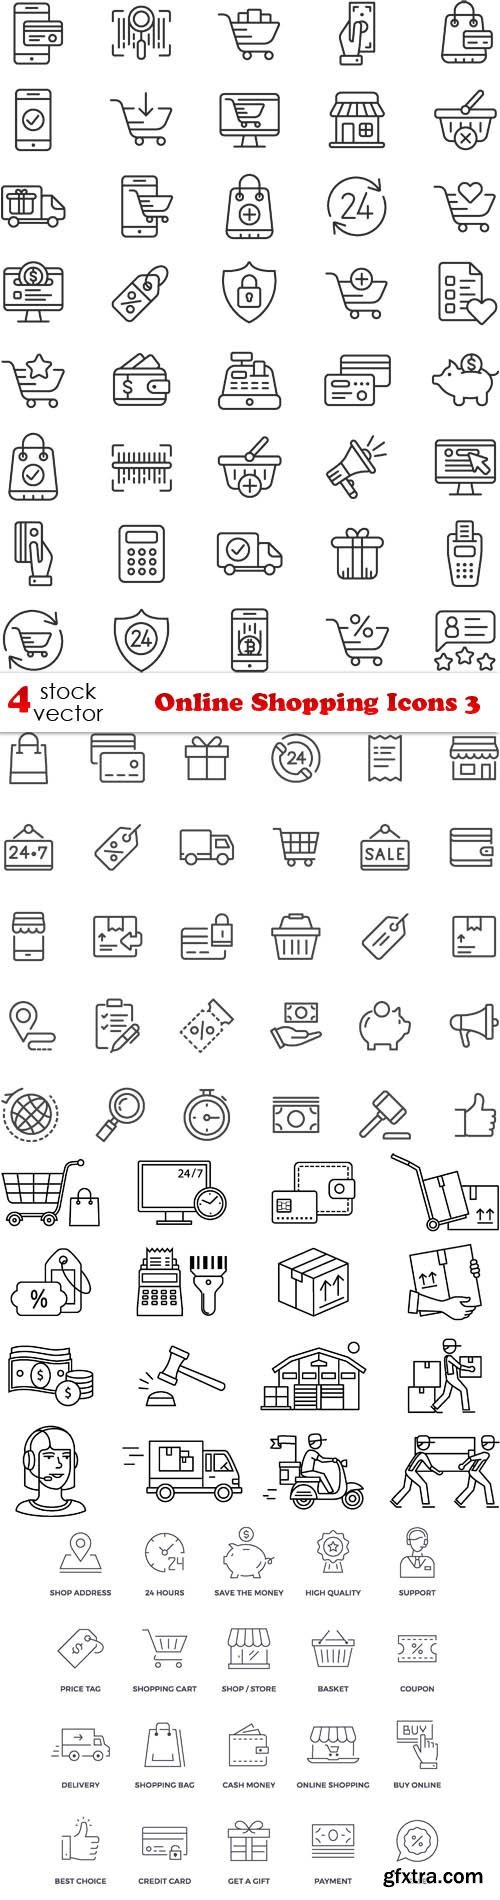 Vectors - Online Shopping Icons 3